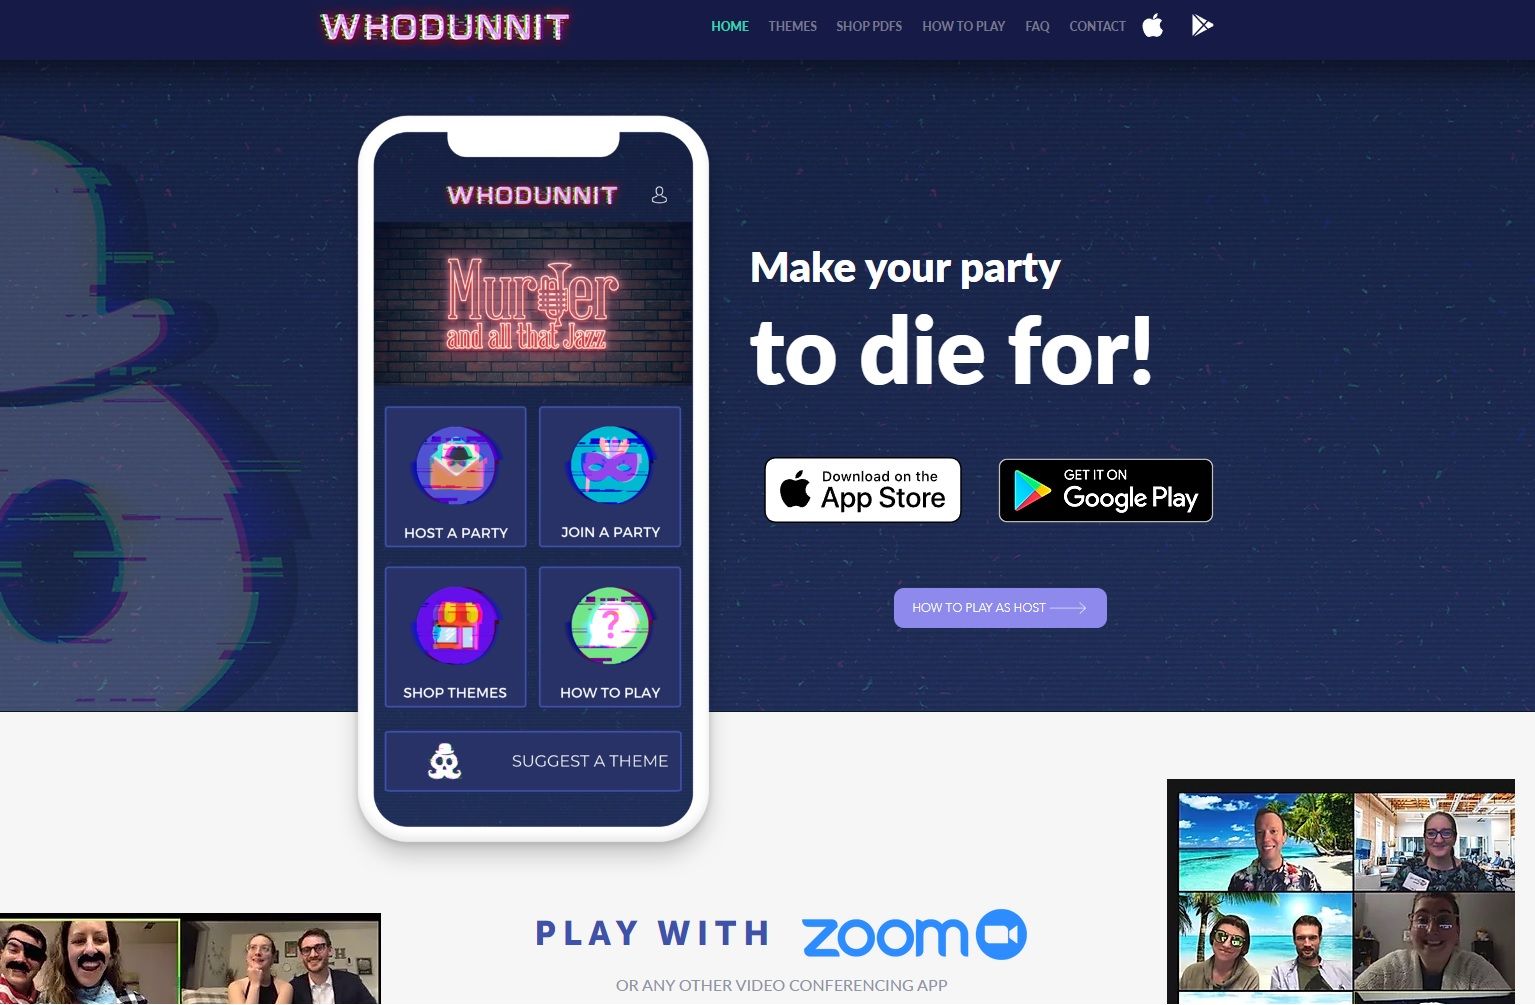 Whodunnit website home page